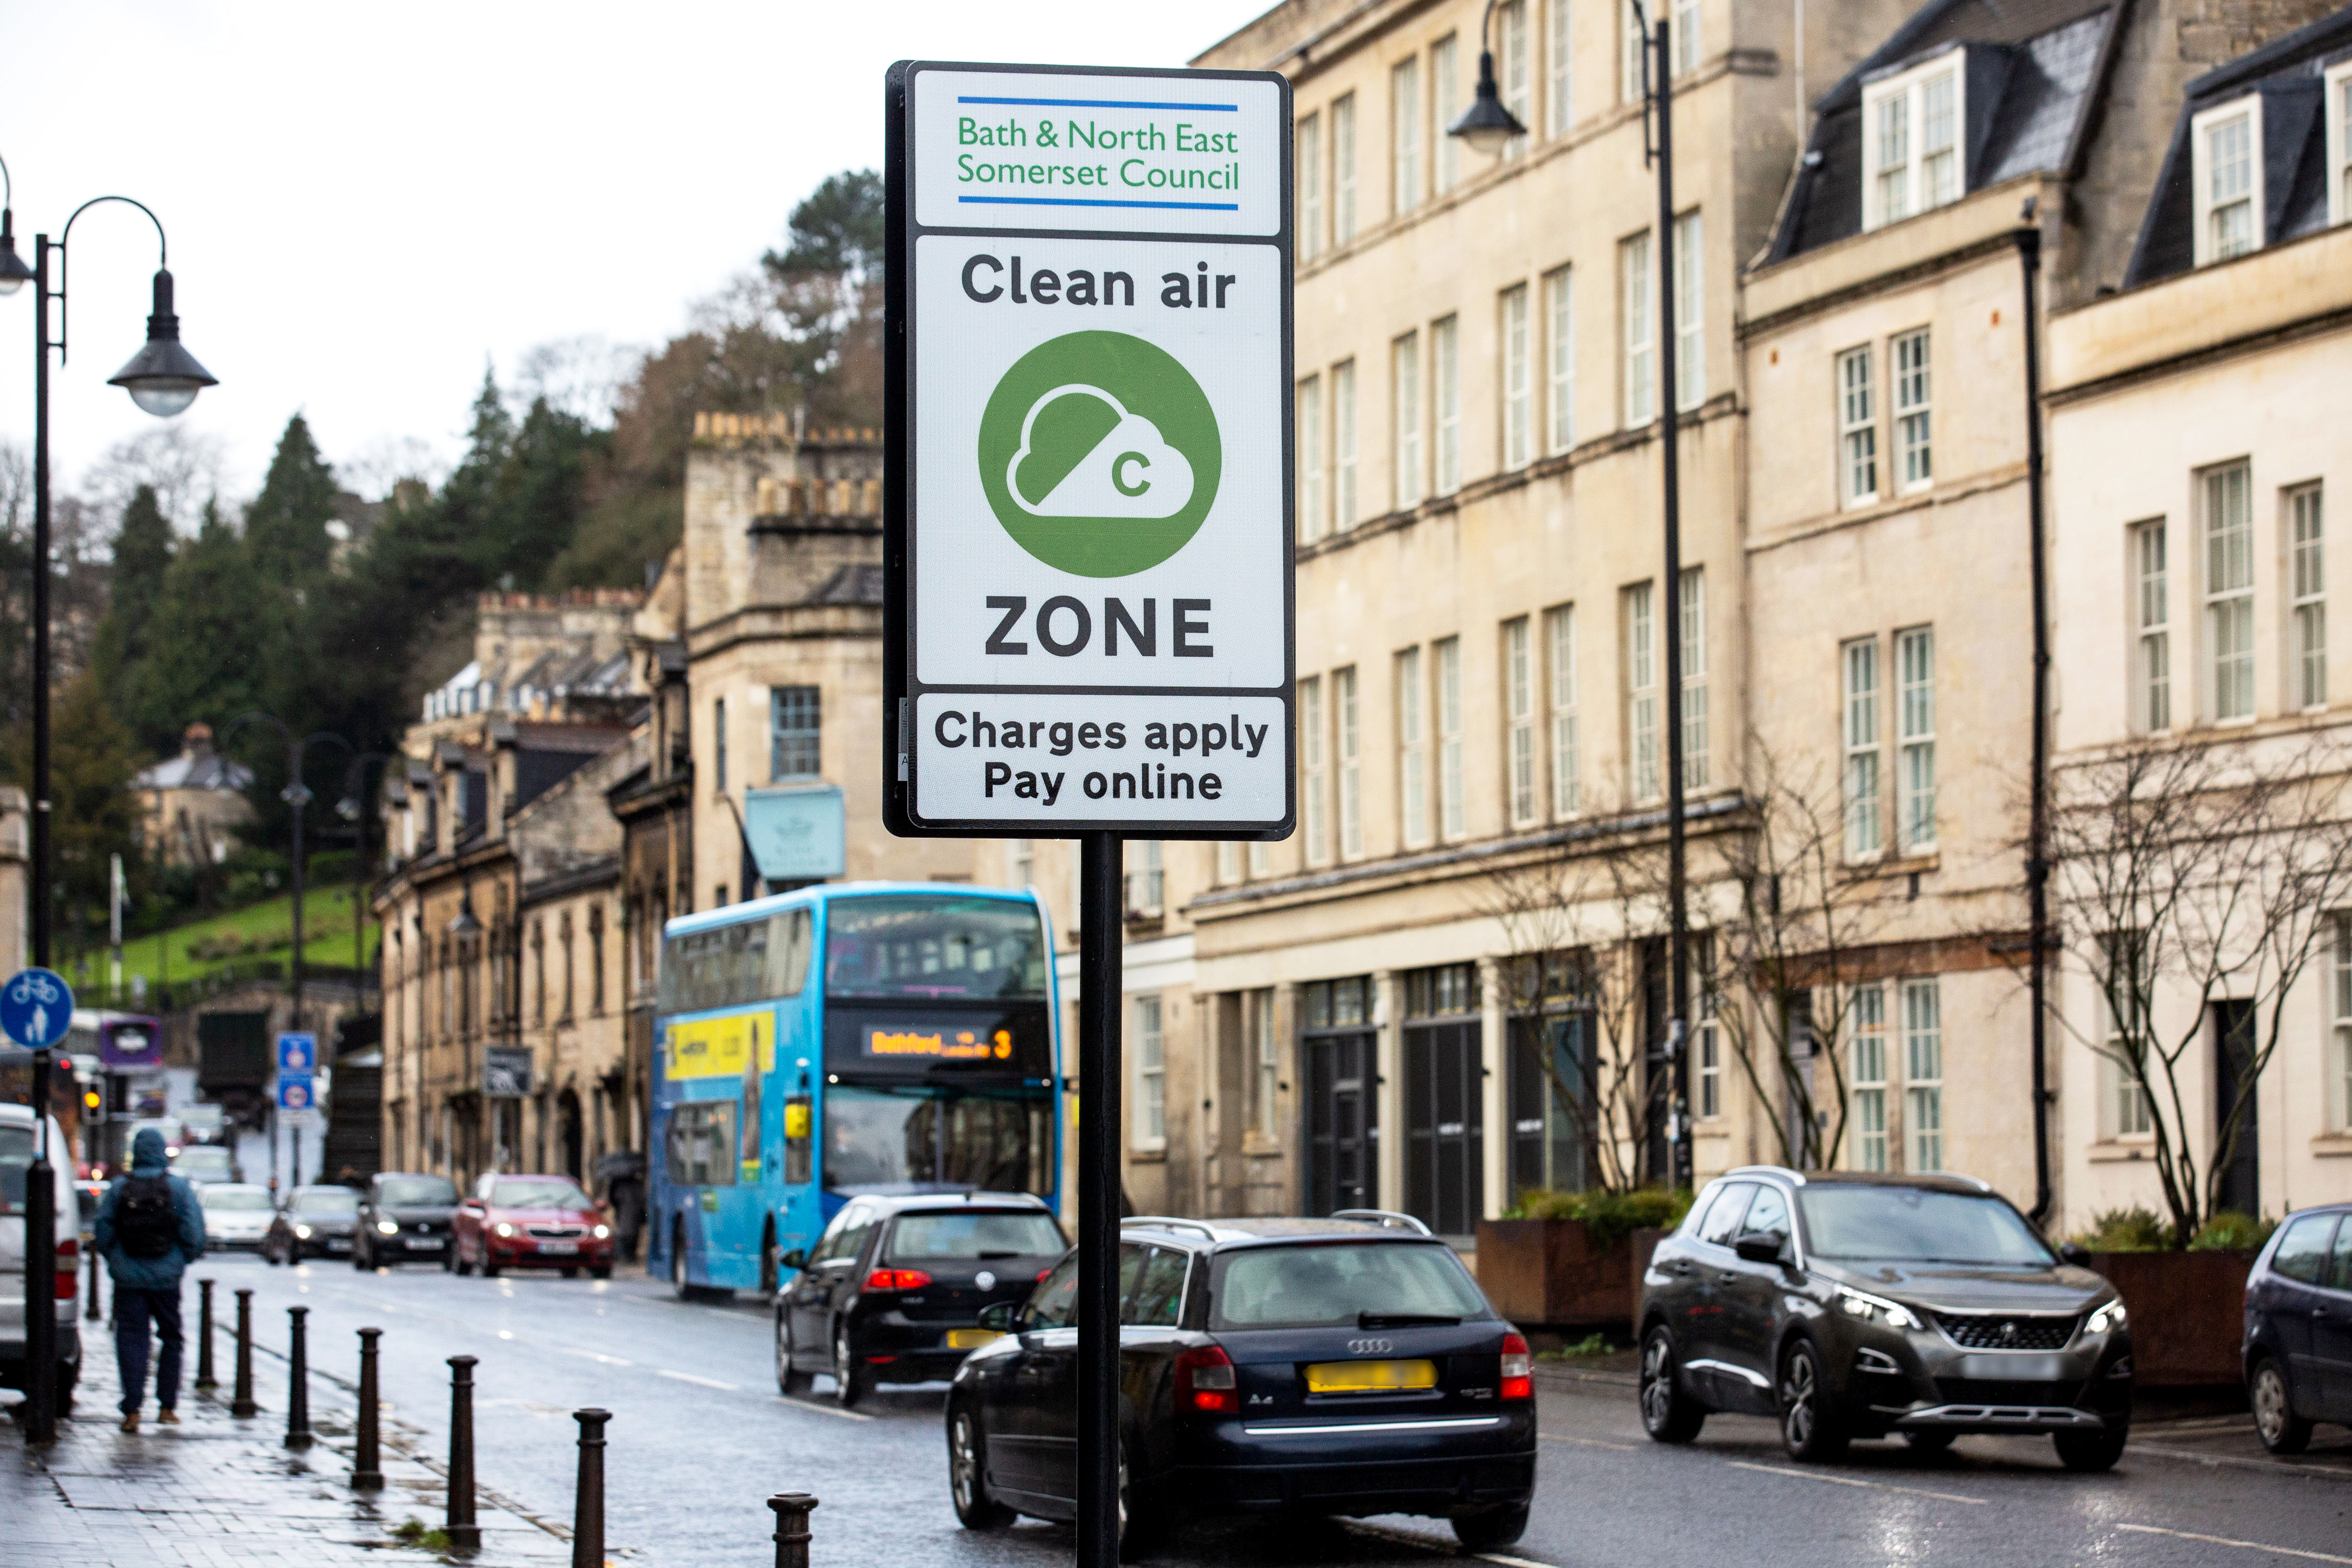 Council thanks city businesses and residents for supporting clean air